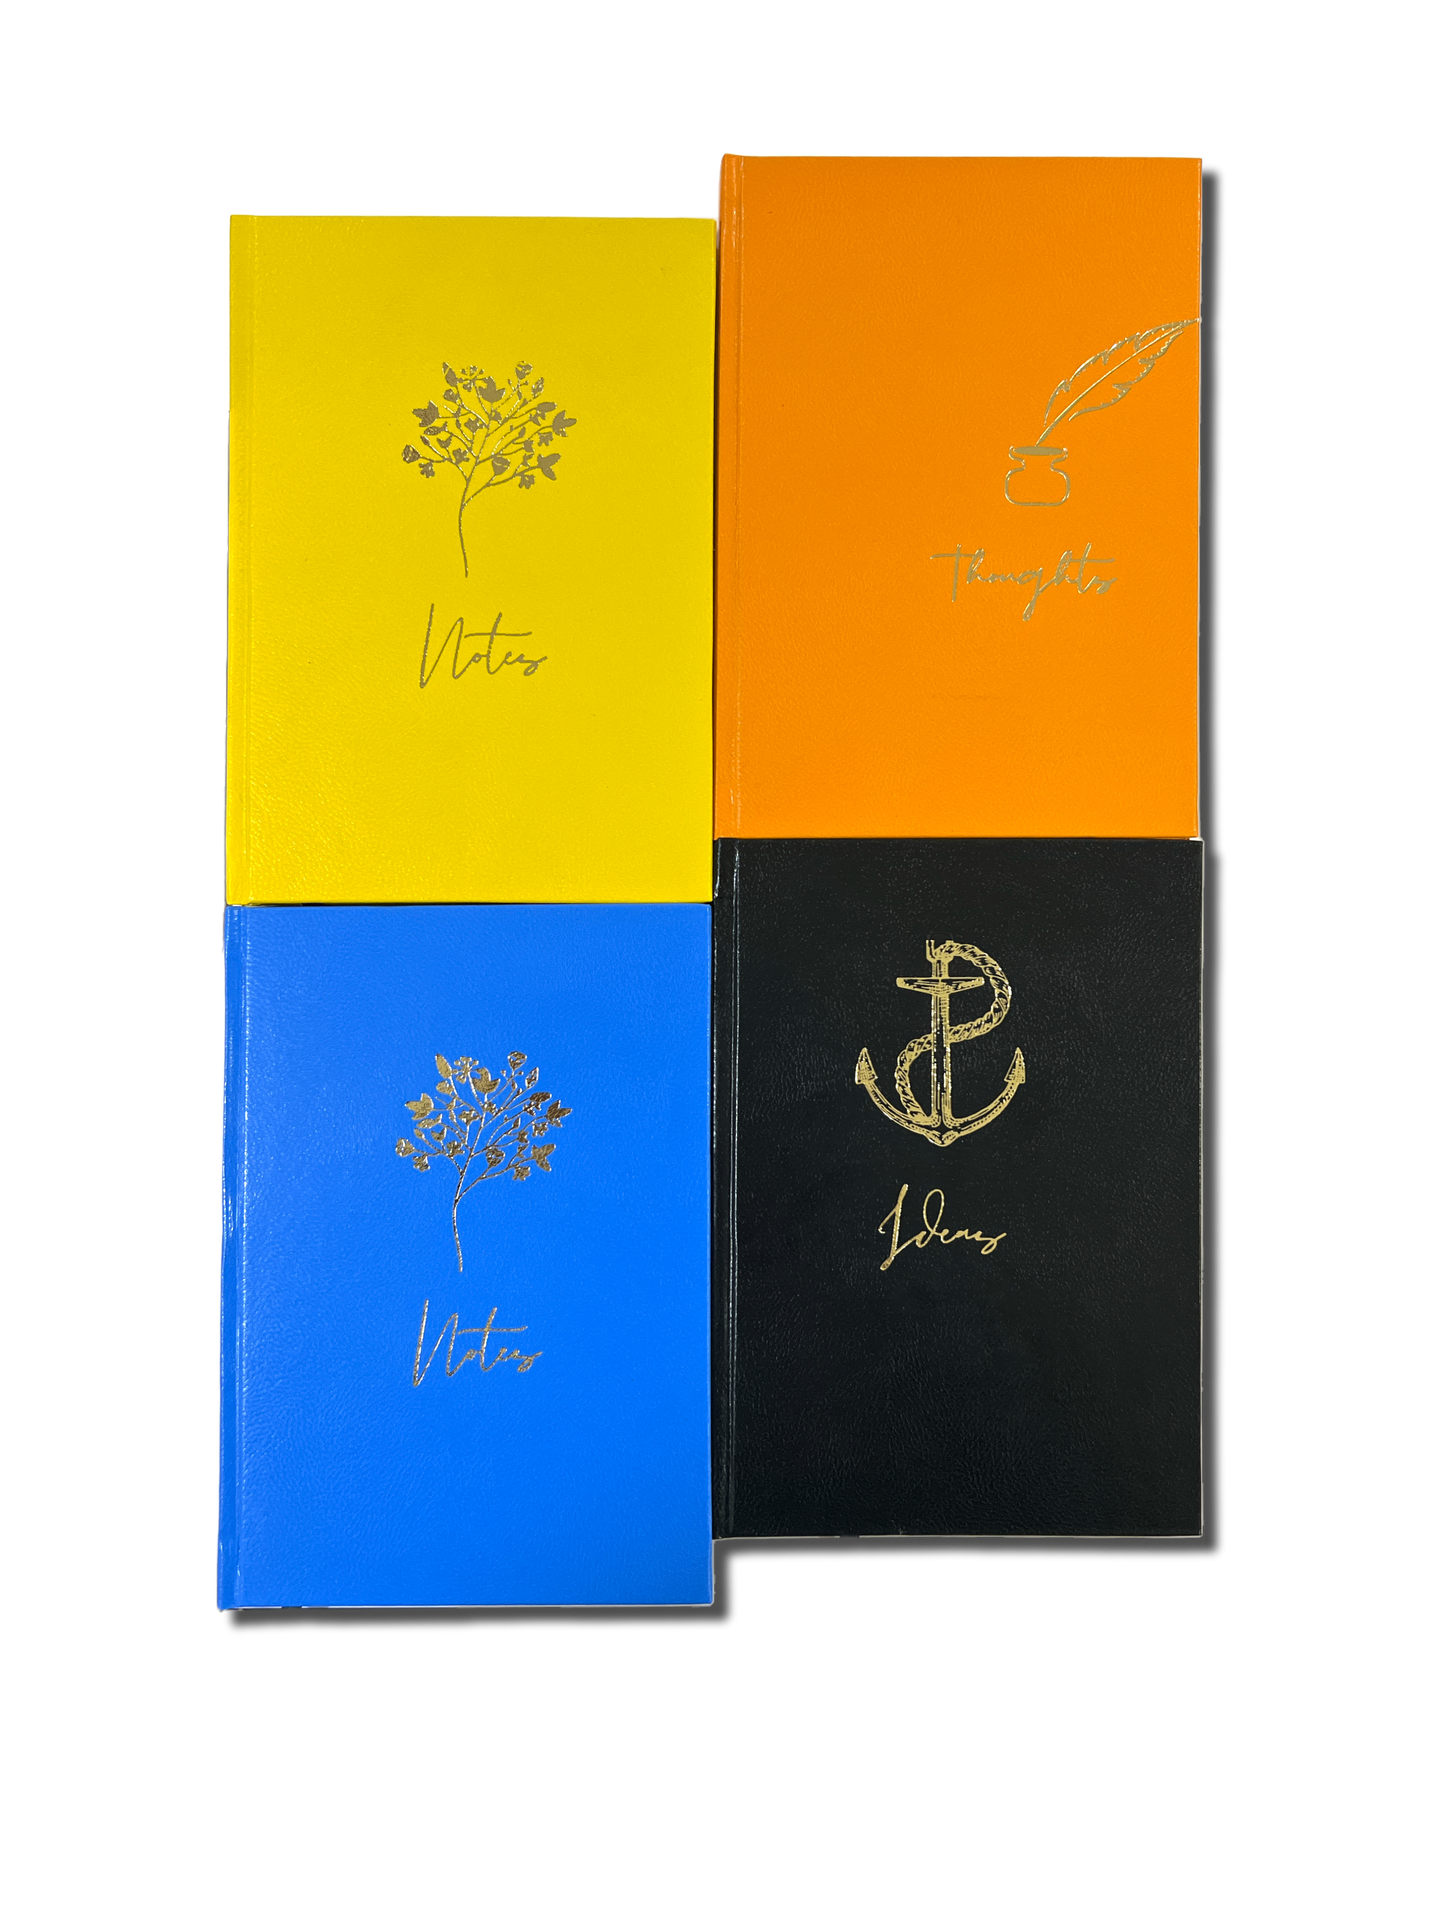 Pragya A5 Notebook (192 pages, Ruled/Plain) Elite Hard Case - PVC Coated Covers | Pack of 3